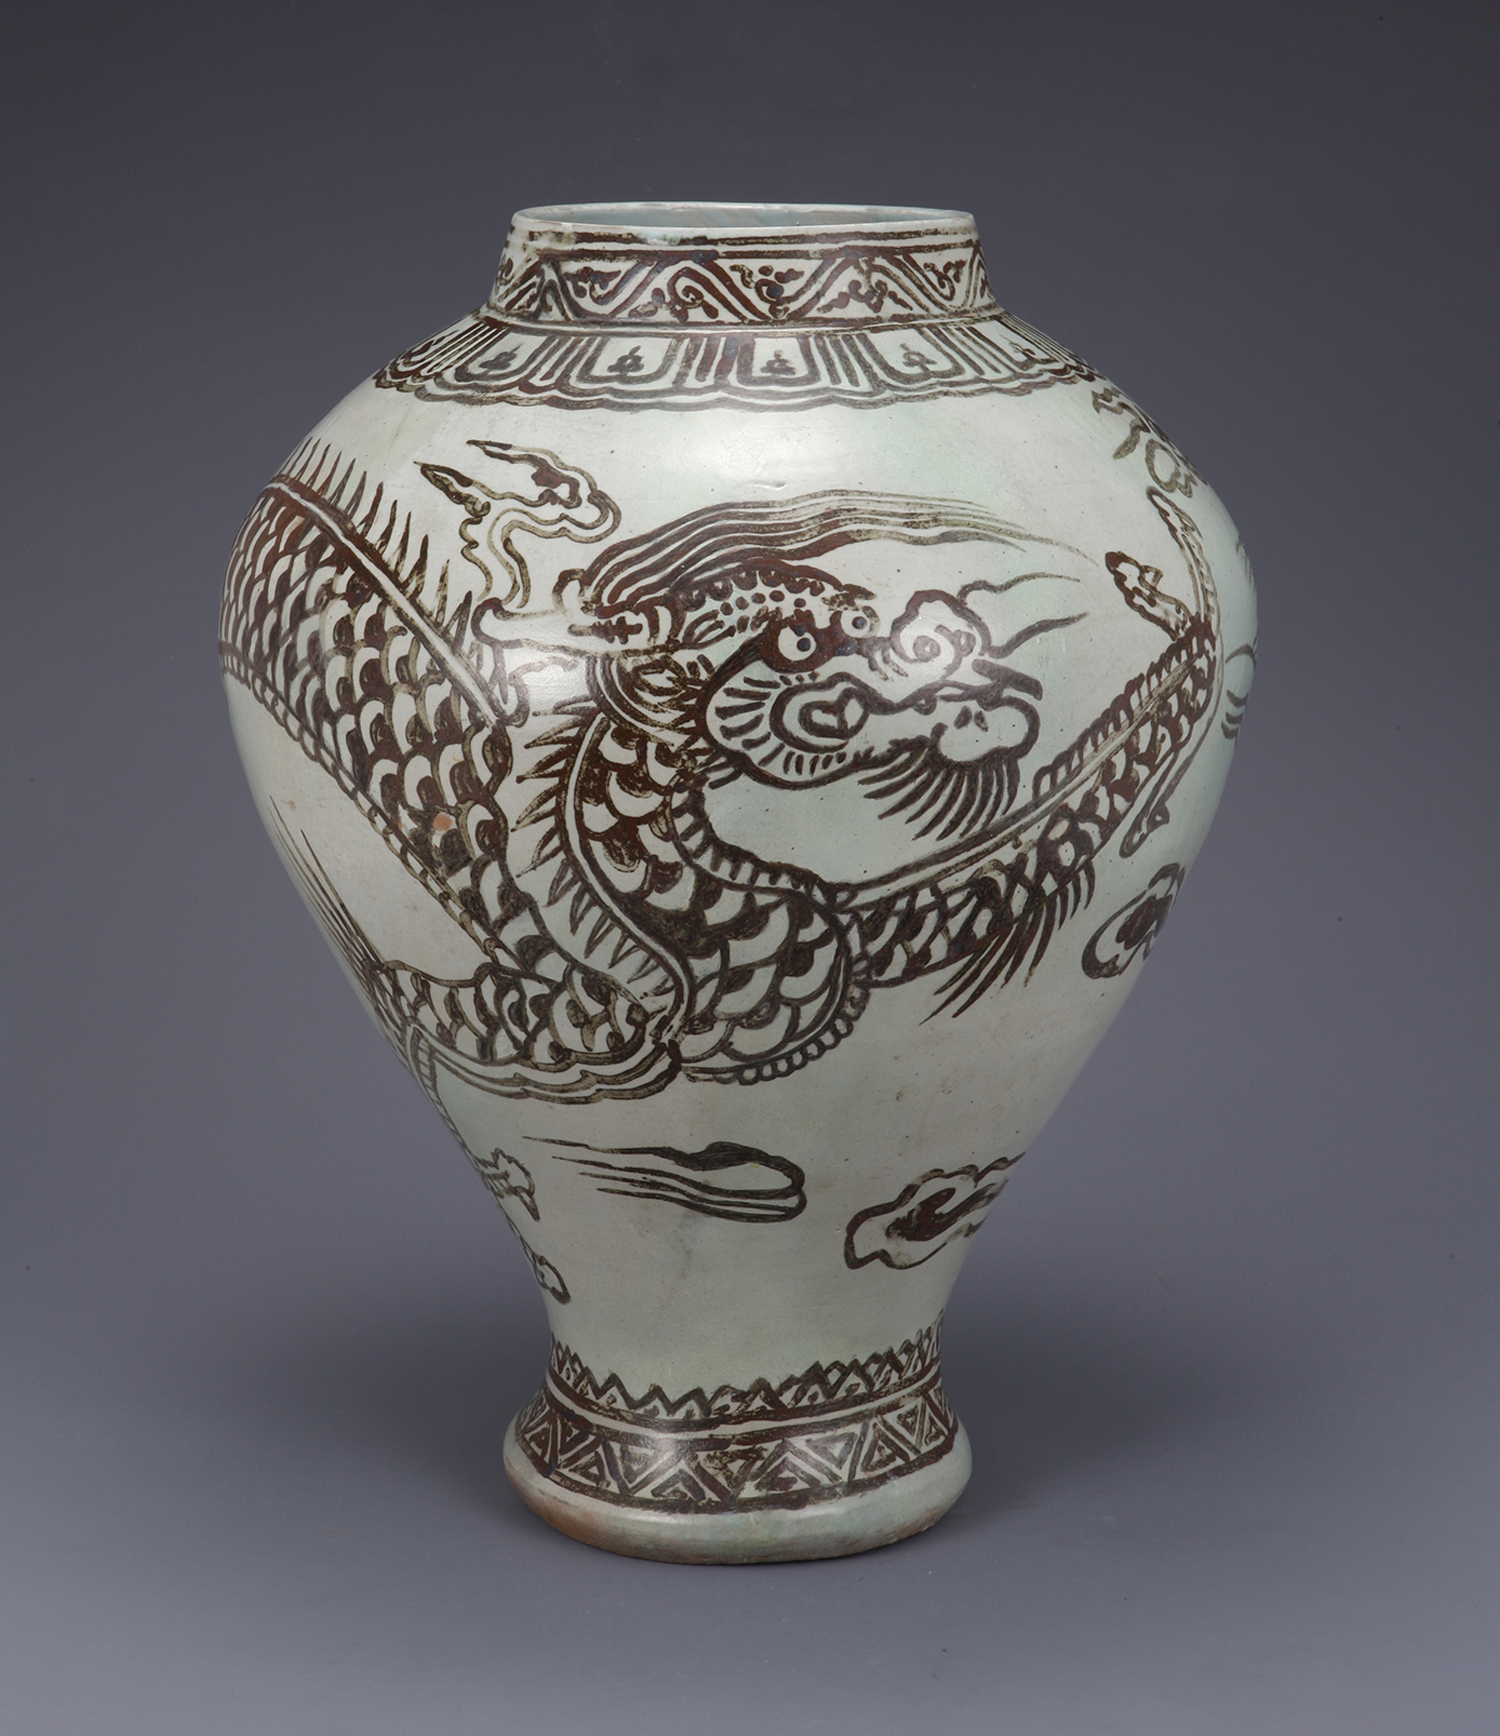 Jar with Cloud and Dragon Design in Underglaze Iron